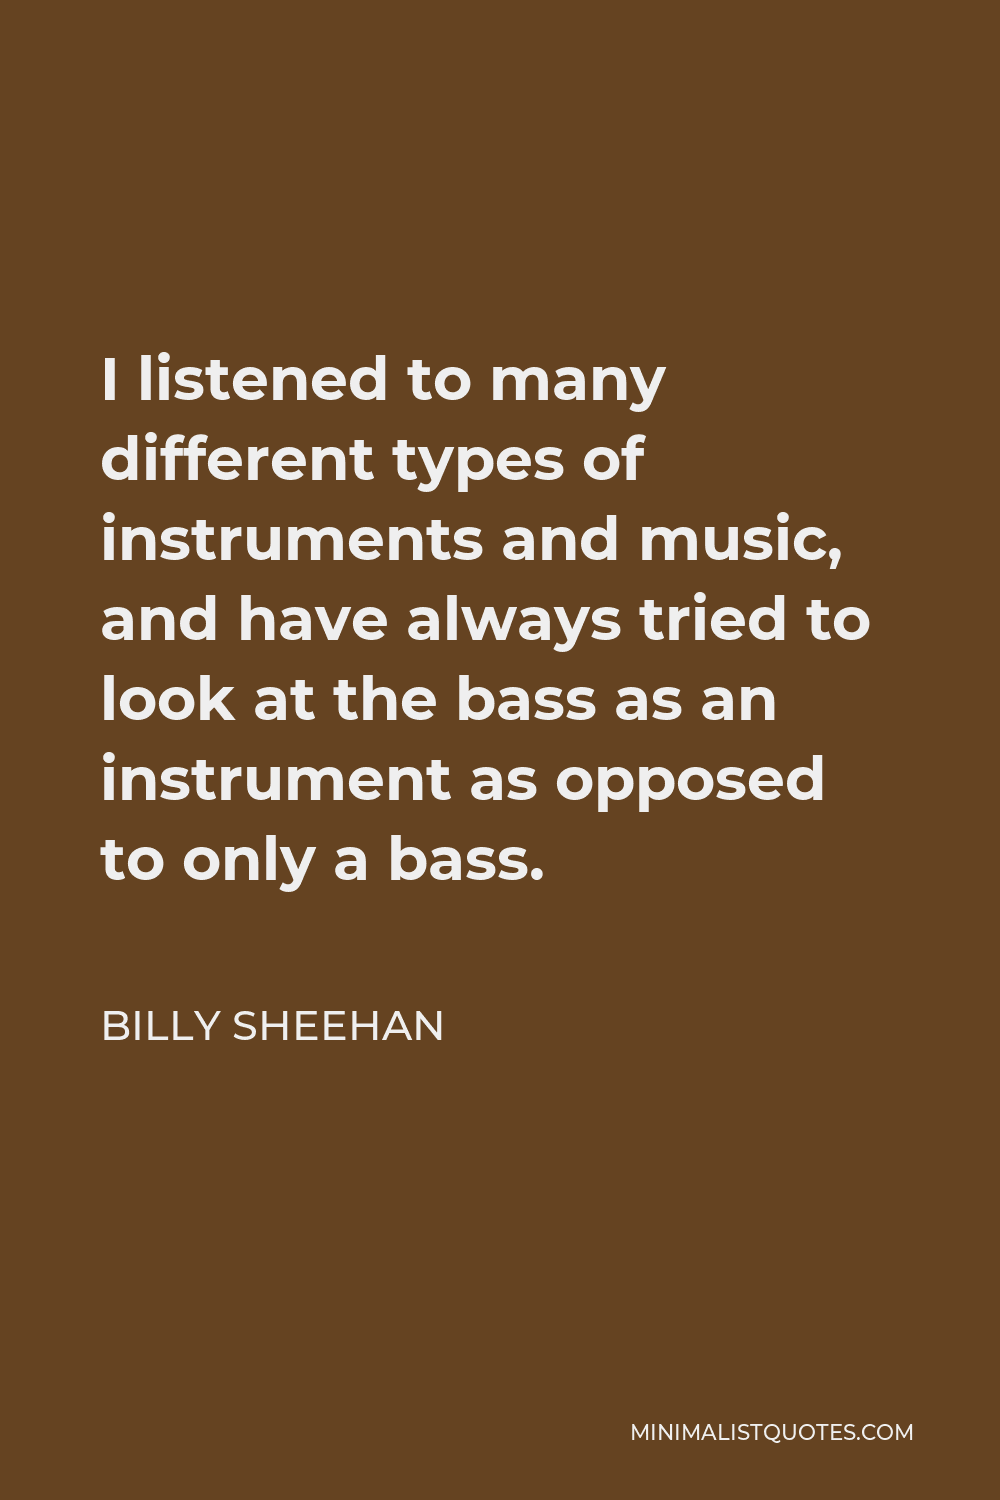 Billy Sheehan Quote - I listened to many different types of instruments and music, and have always tried to look at the bass as an instrument as opposed to only a bass.